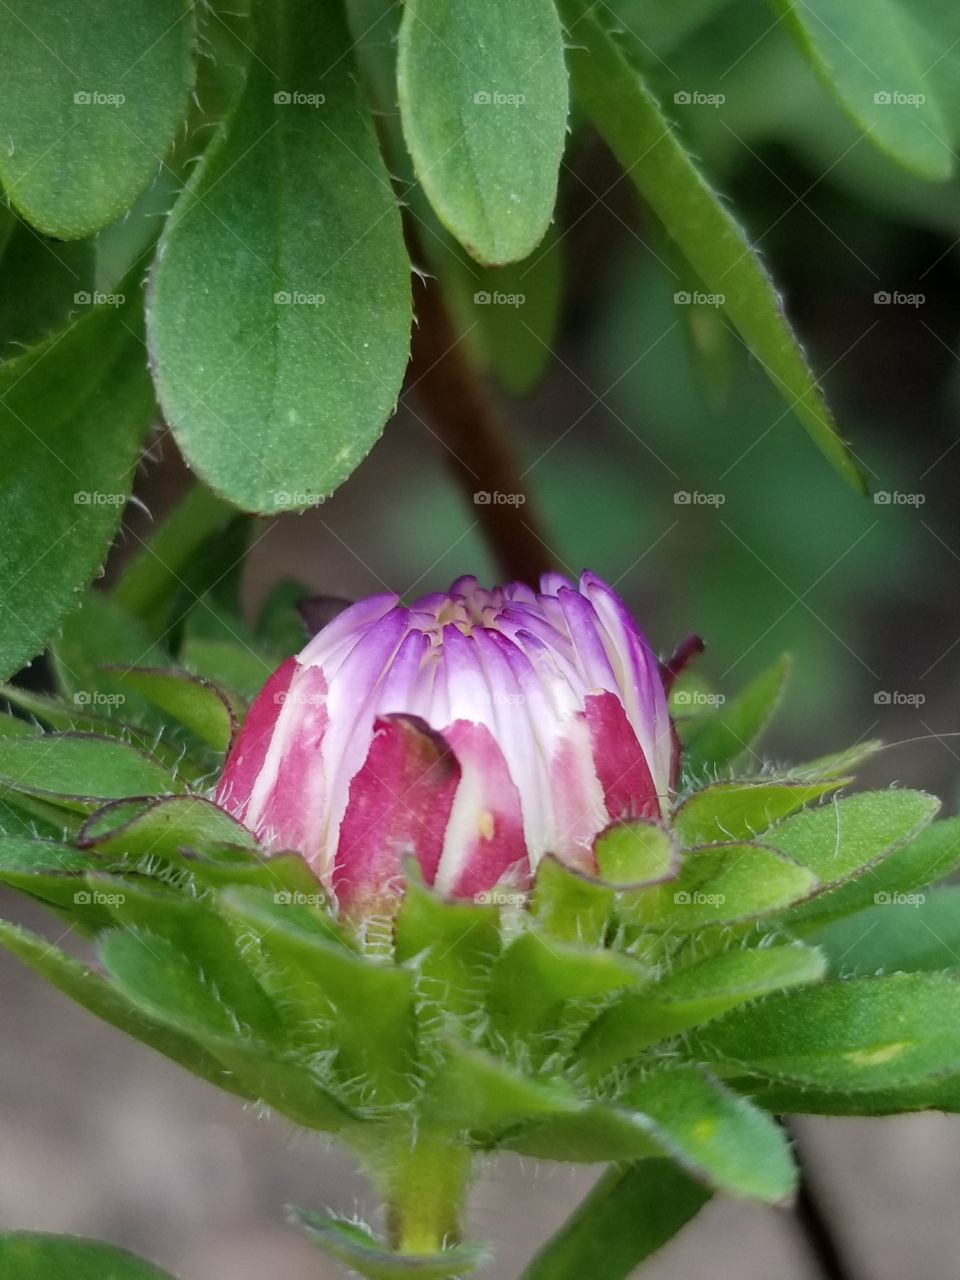 Flower bud ready to open up its colors